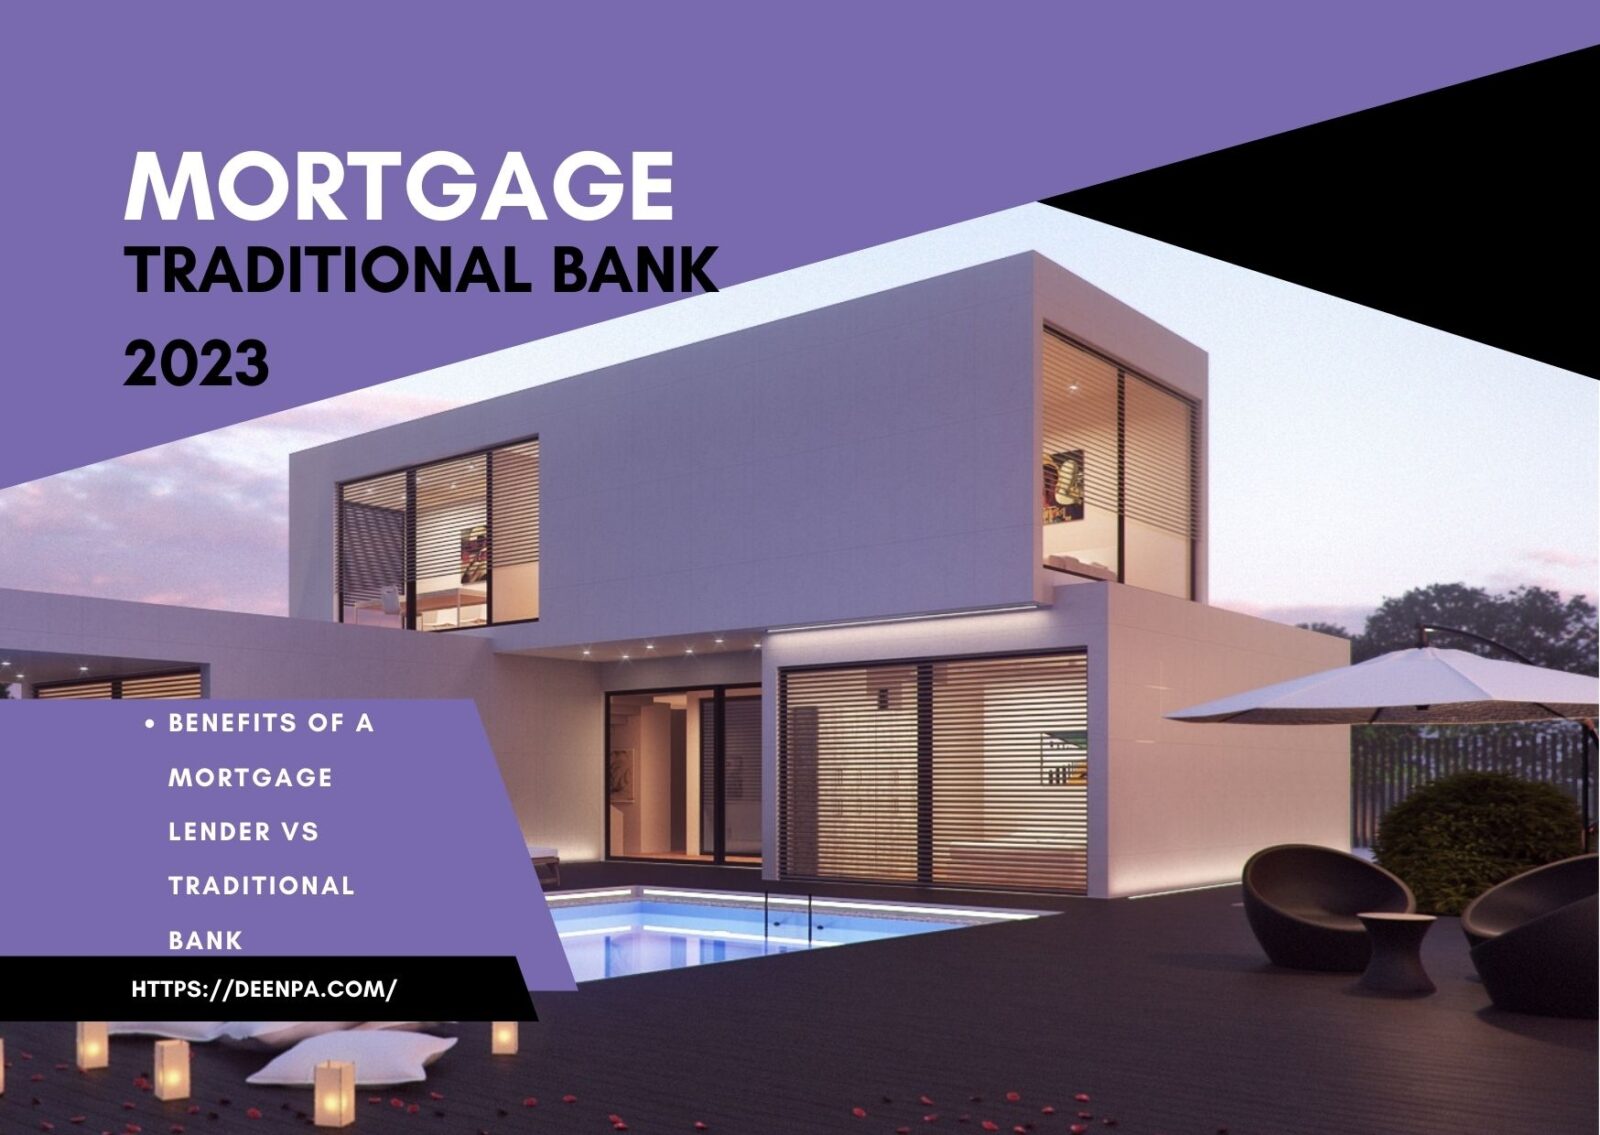 Benefits of a Mortgage Lender vs Traditional Bank